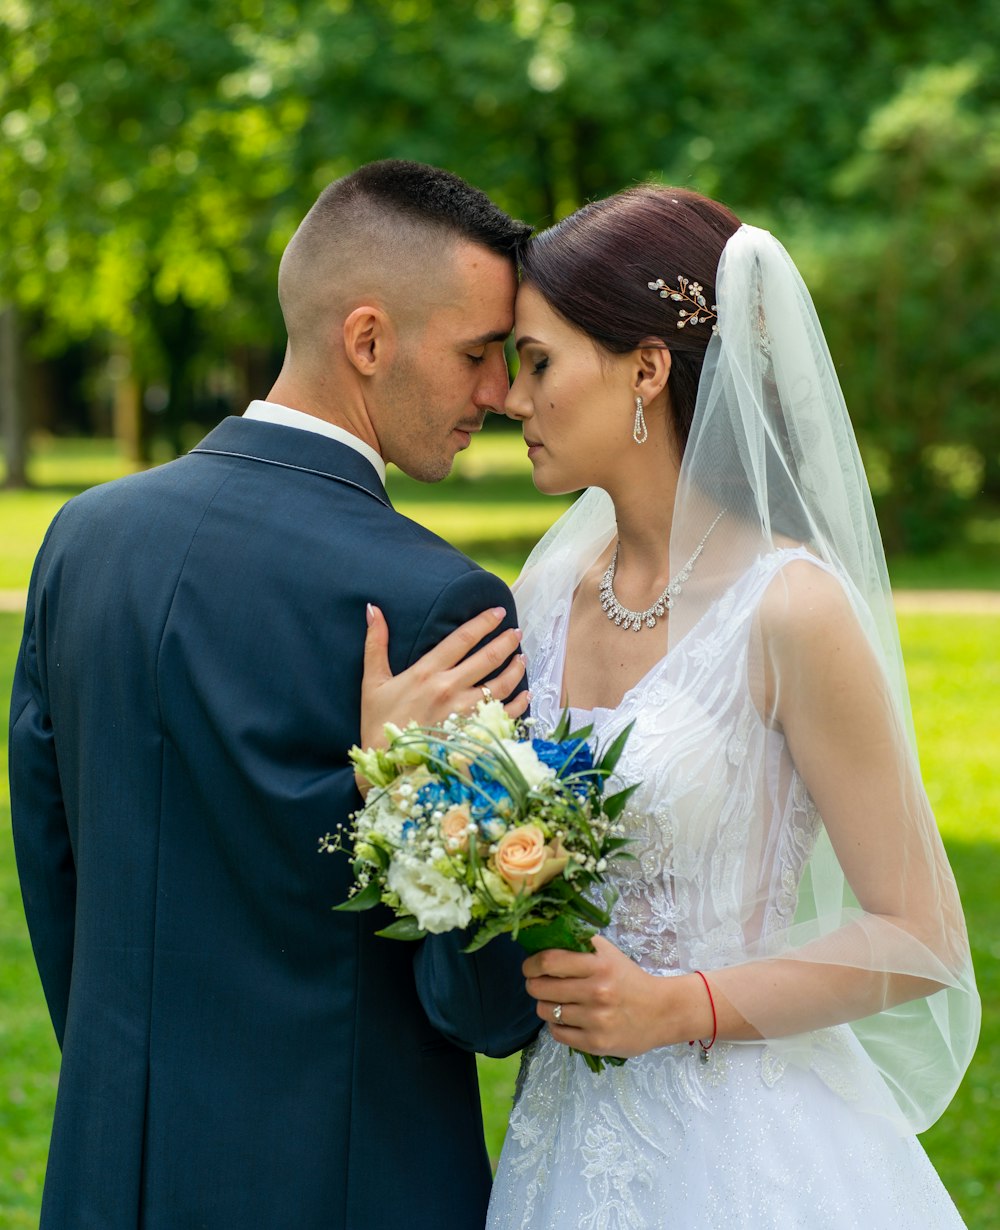 man in black suit kissing woman in white wedding dress on green grass field during daytime